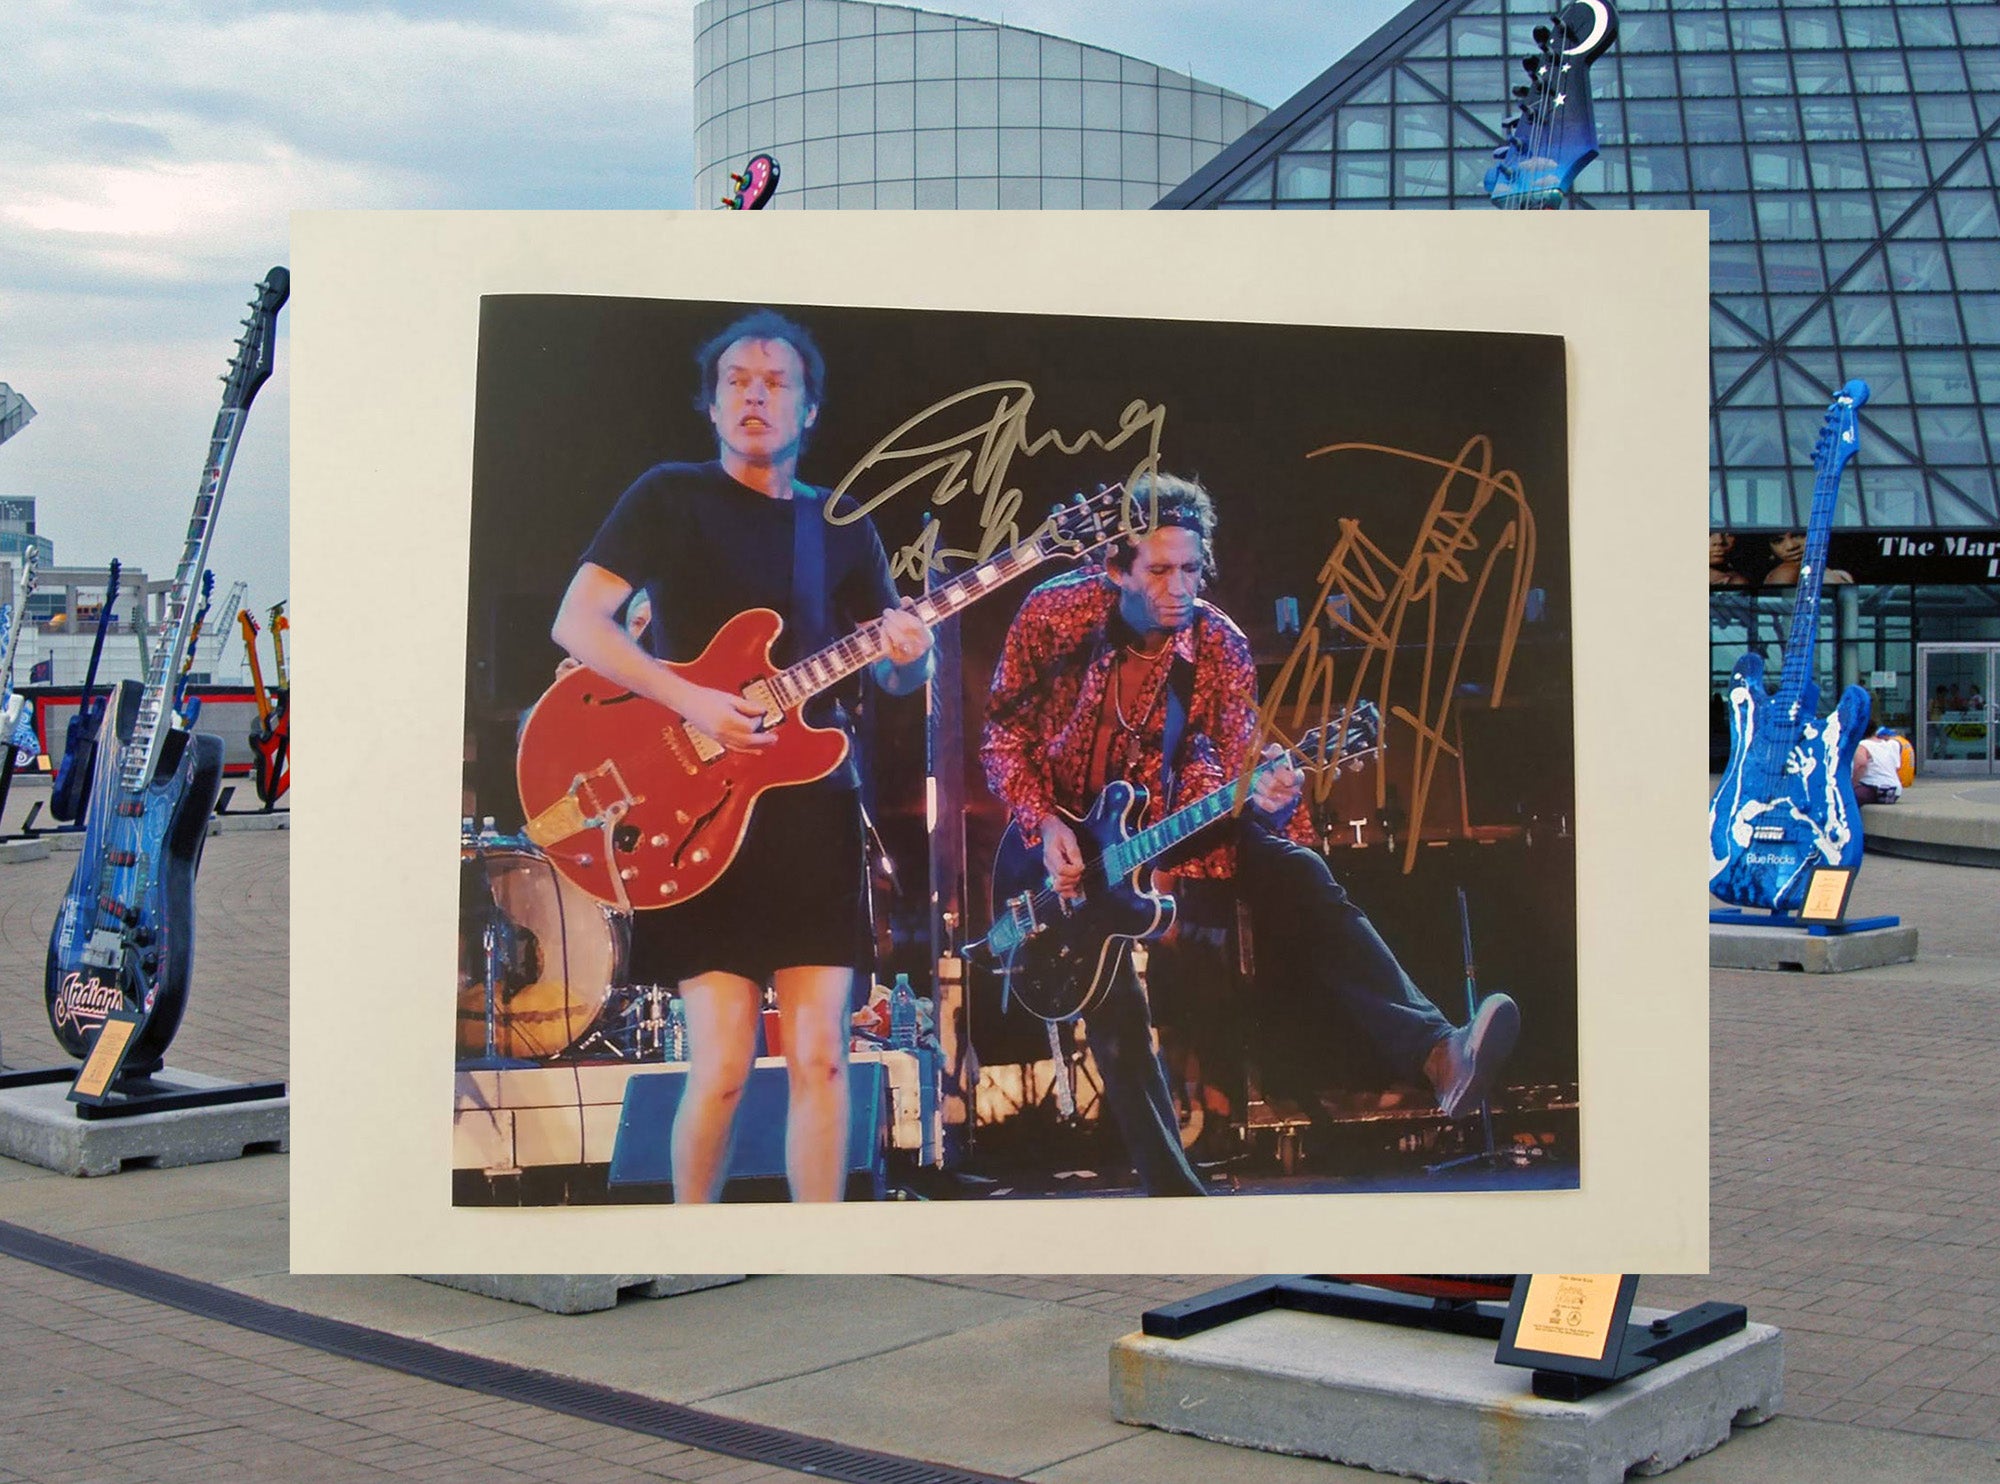 Keith Richards and Angus Young 8 x 10 photo signed with proof